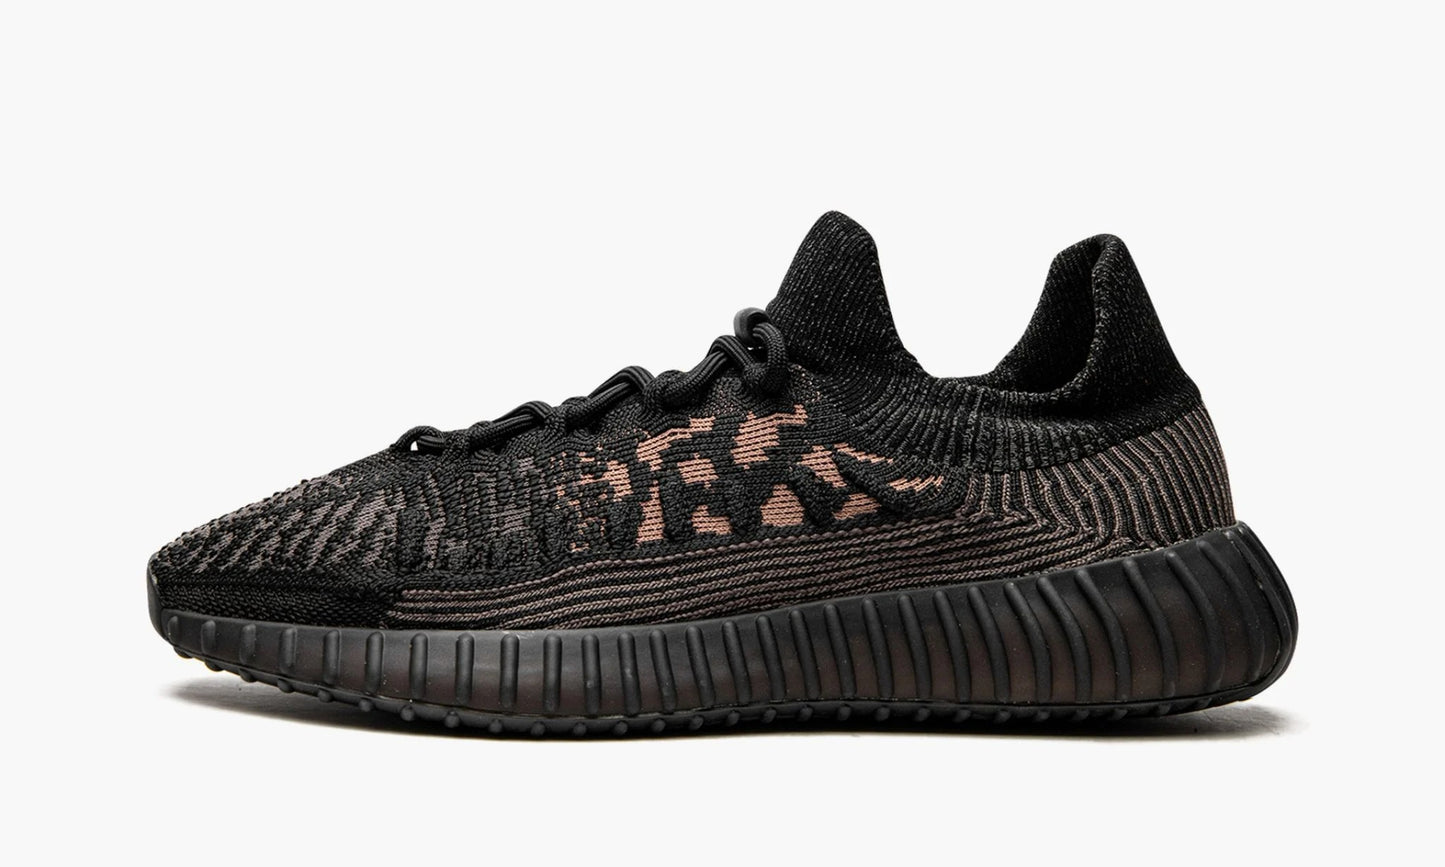 Yeezy Boost 350 V2 CMPCT "Slate Carbon"